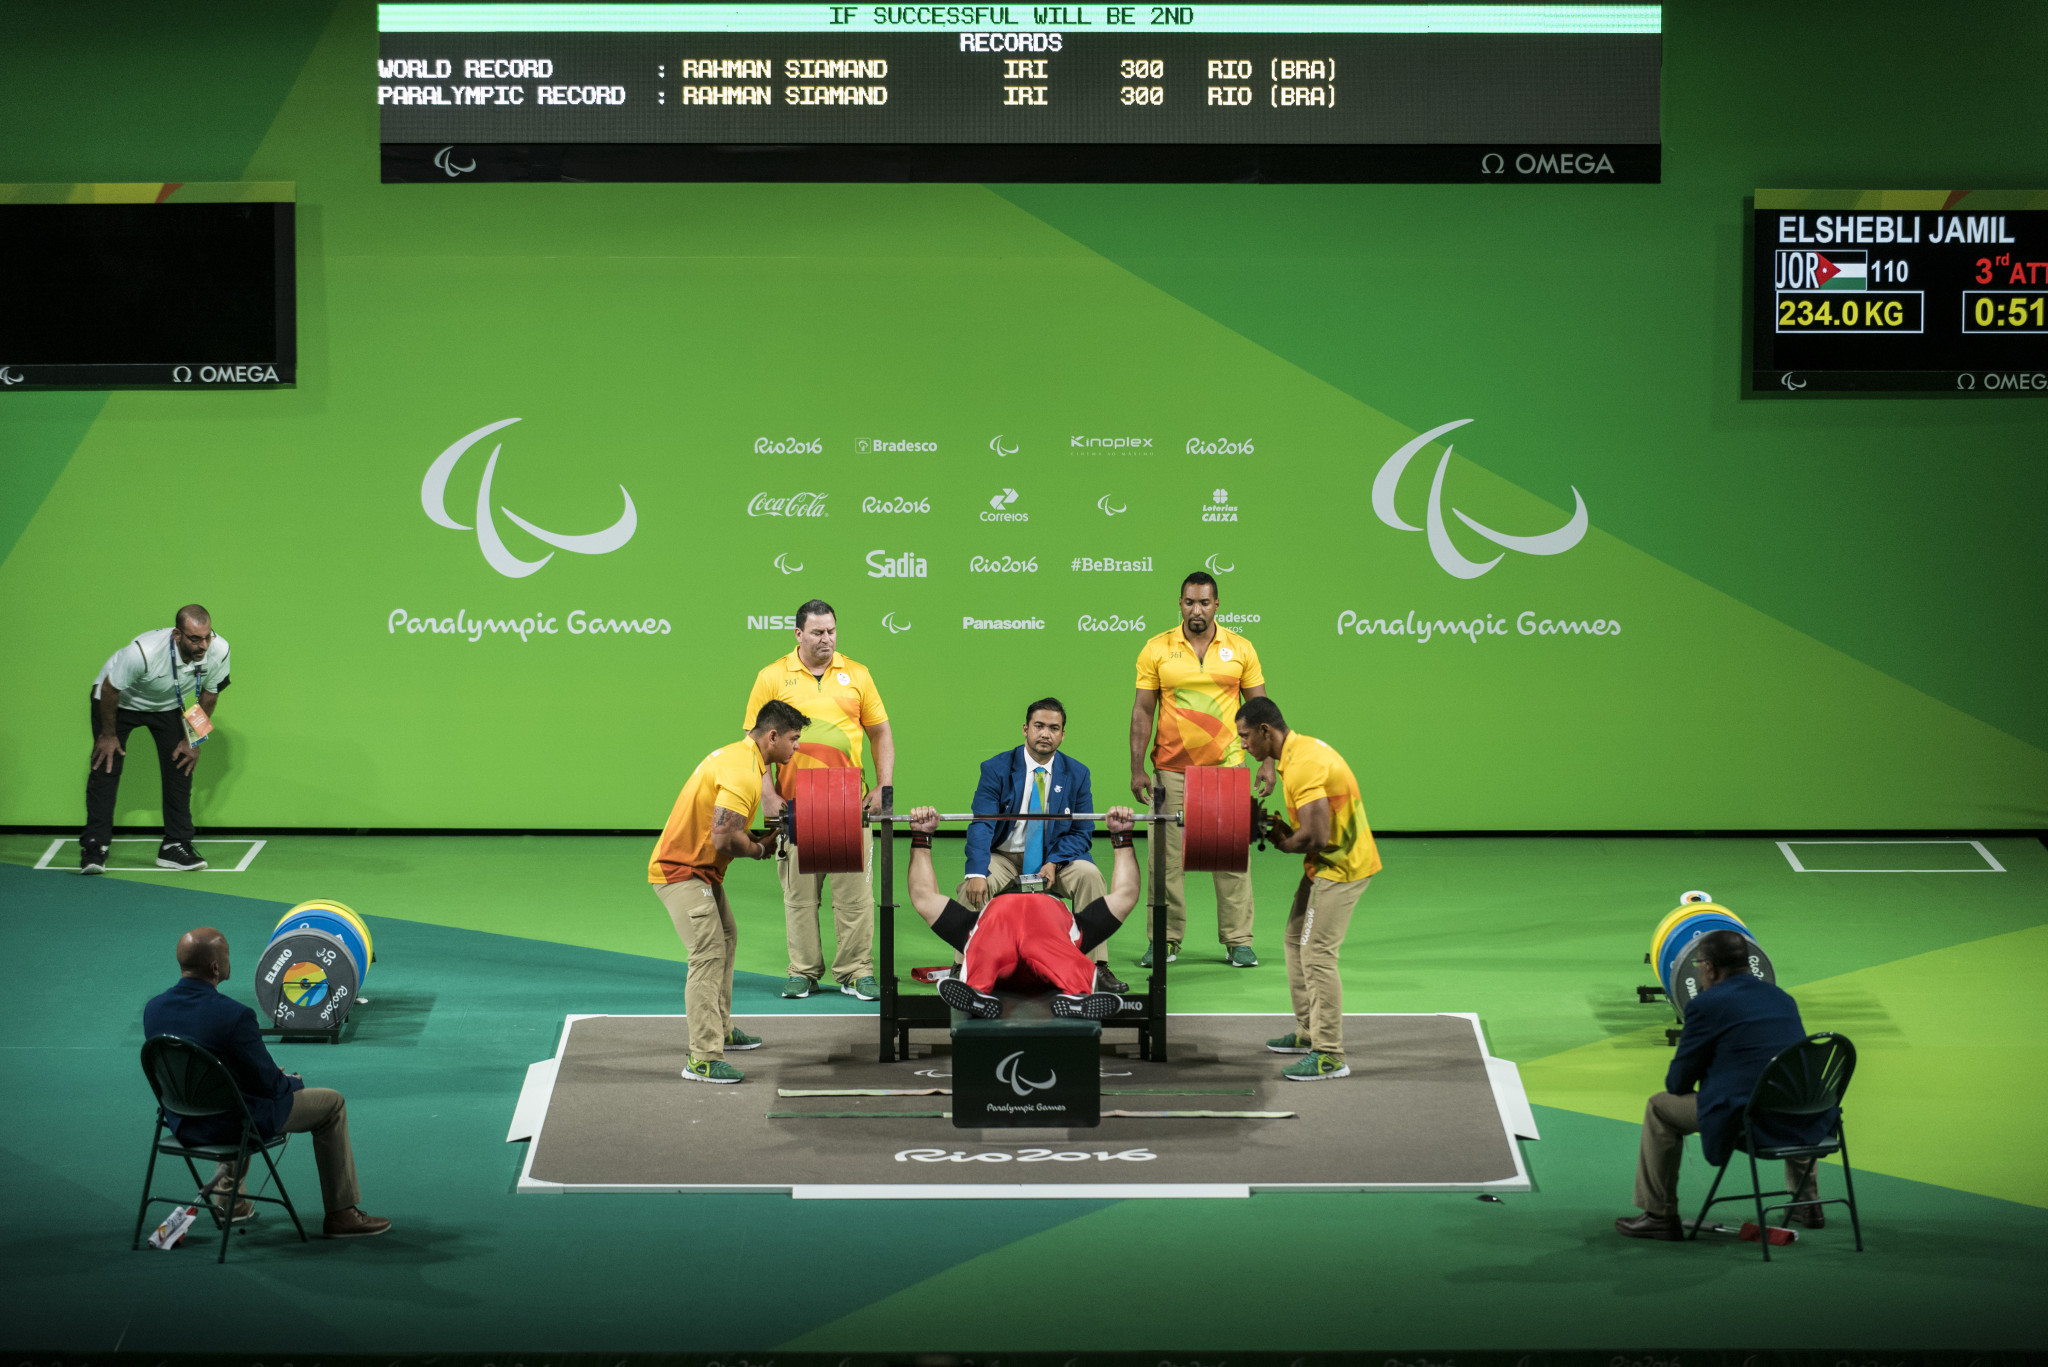 The seminar included discussions on officiating Para-powerlifting events and video assessments of lifts from previous competitions ©Getty Images